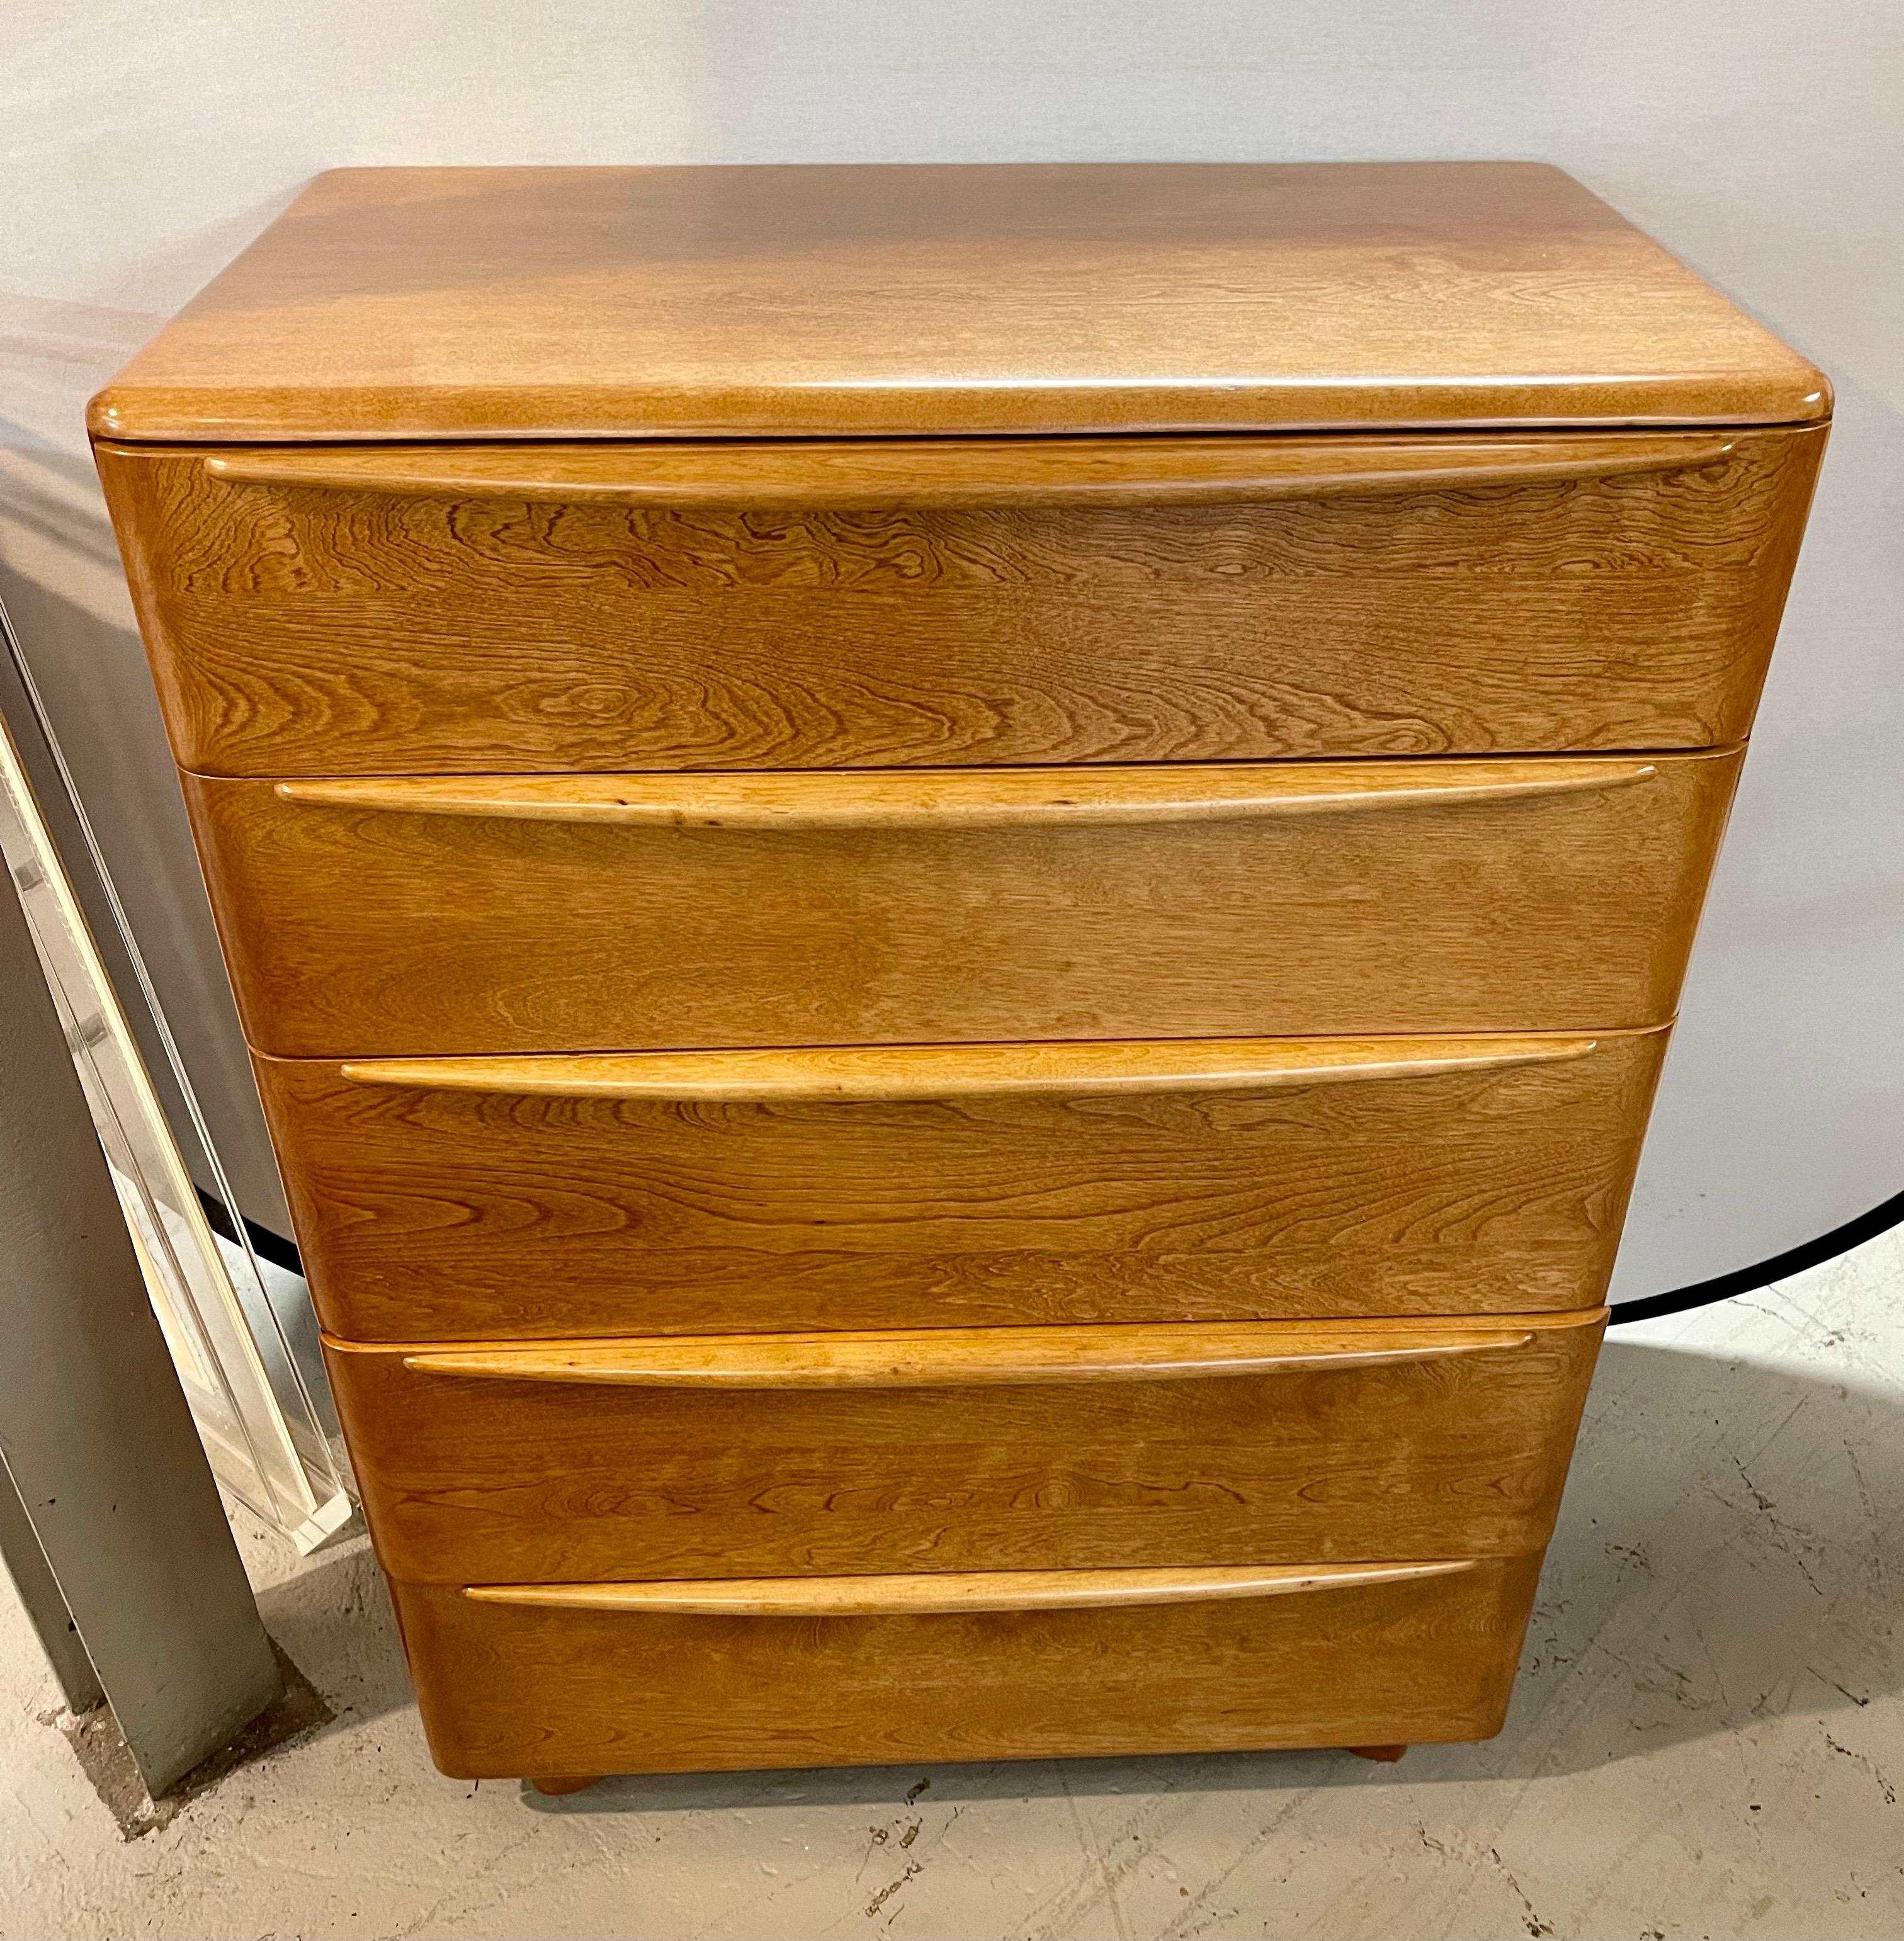 Tall Heywood Wakefield chest with birch construction with case having five long drawers. Wheat finish. Iconic classic mid century classic. Own the best.